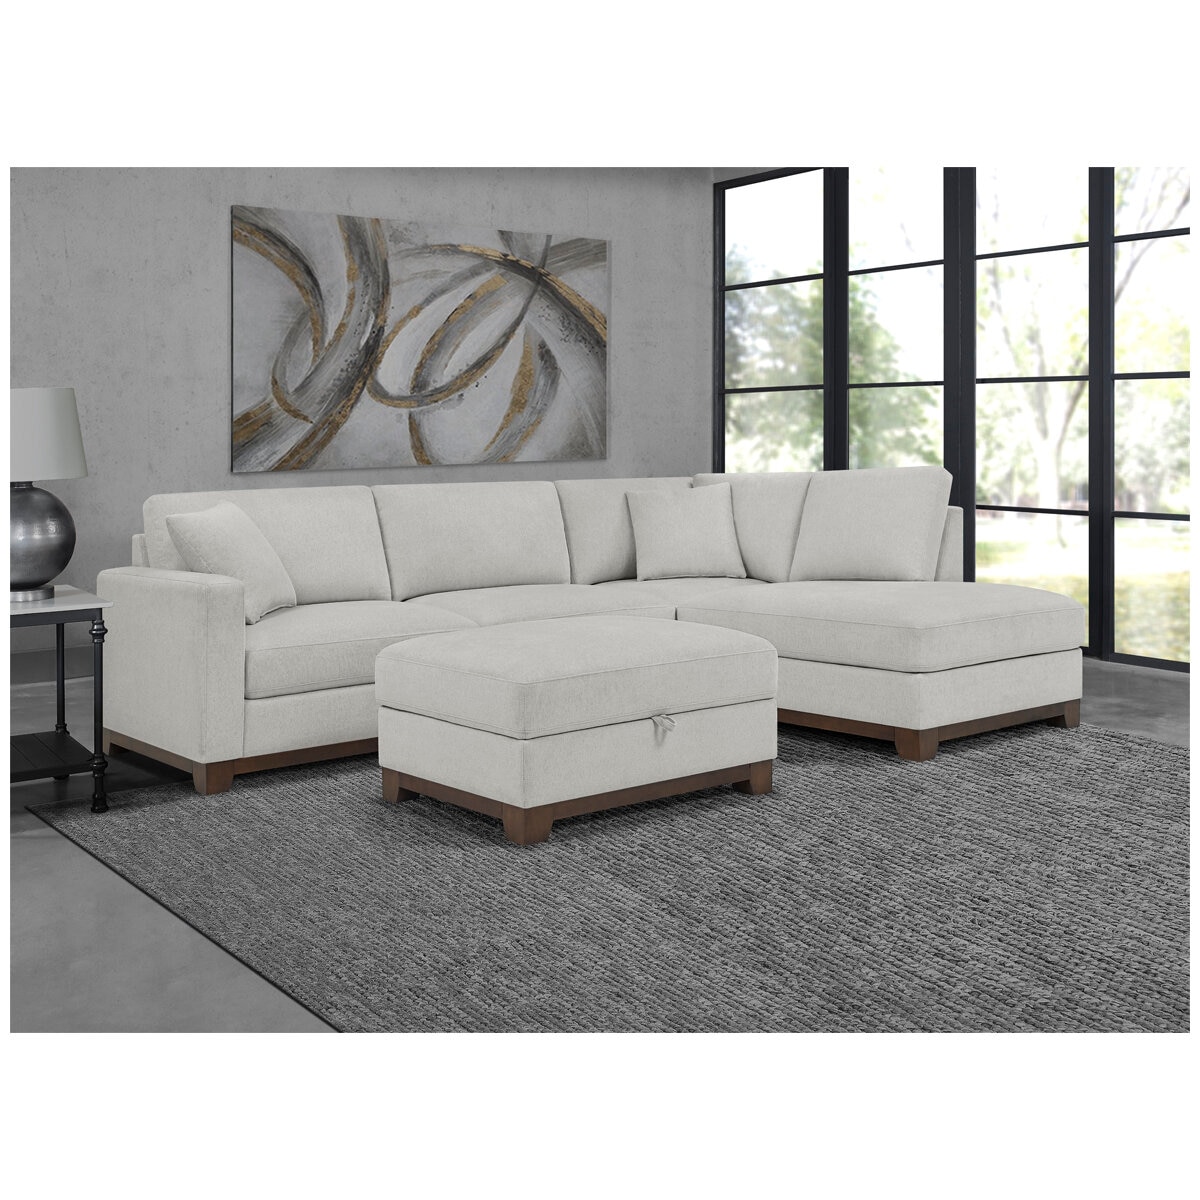 Thomasville 3 Piece Fabric Sectional With Chaise and Storage Ottoman